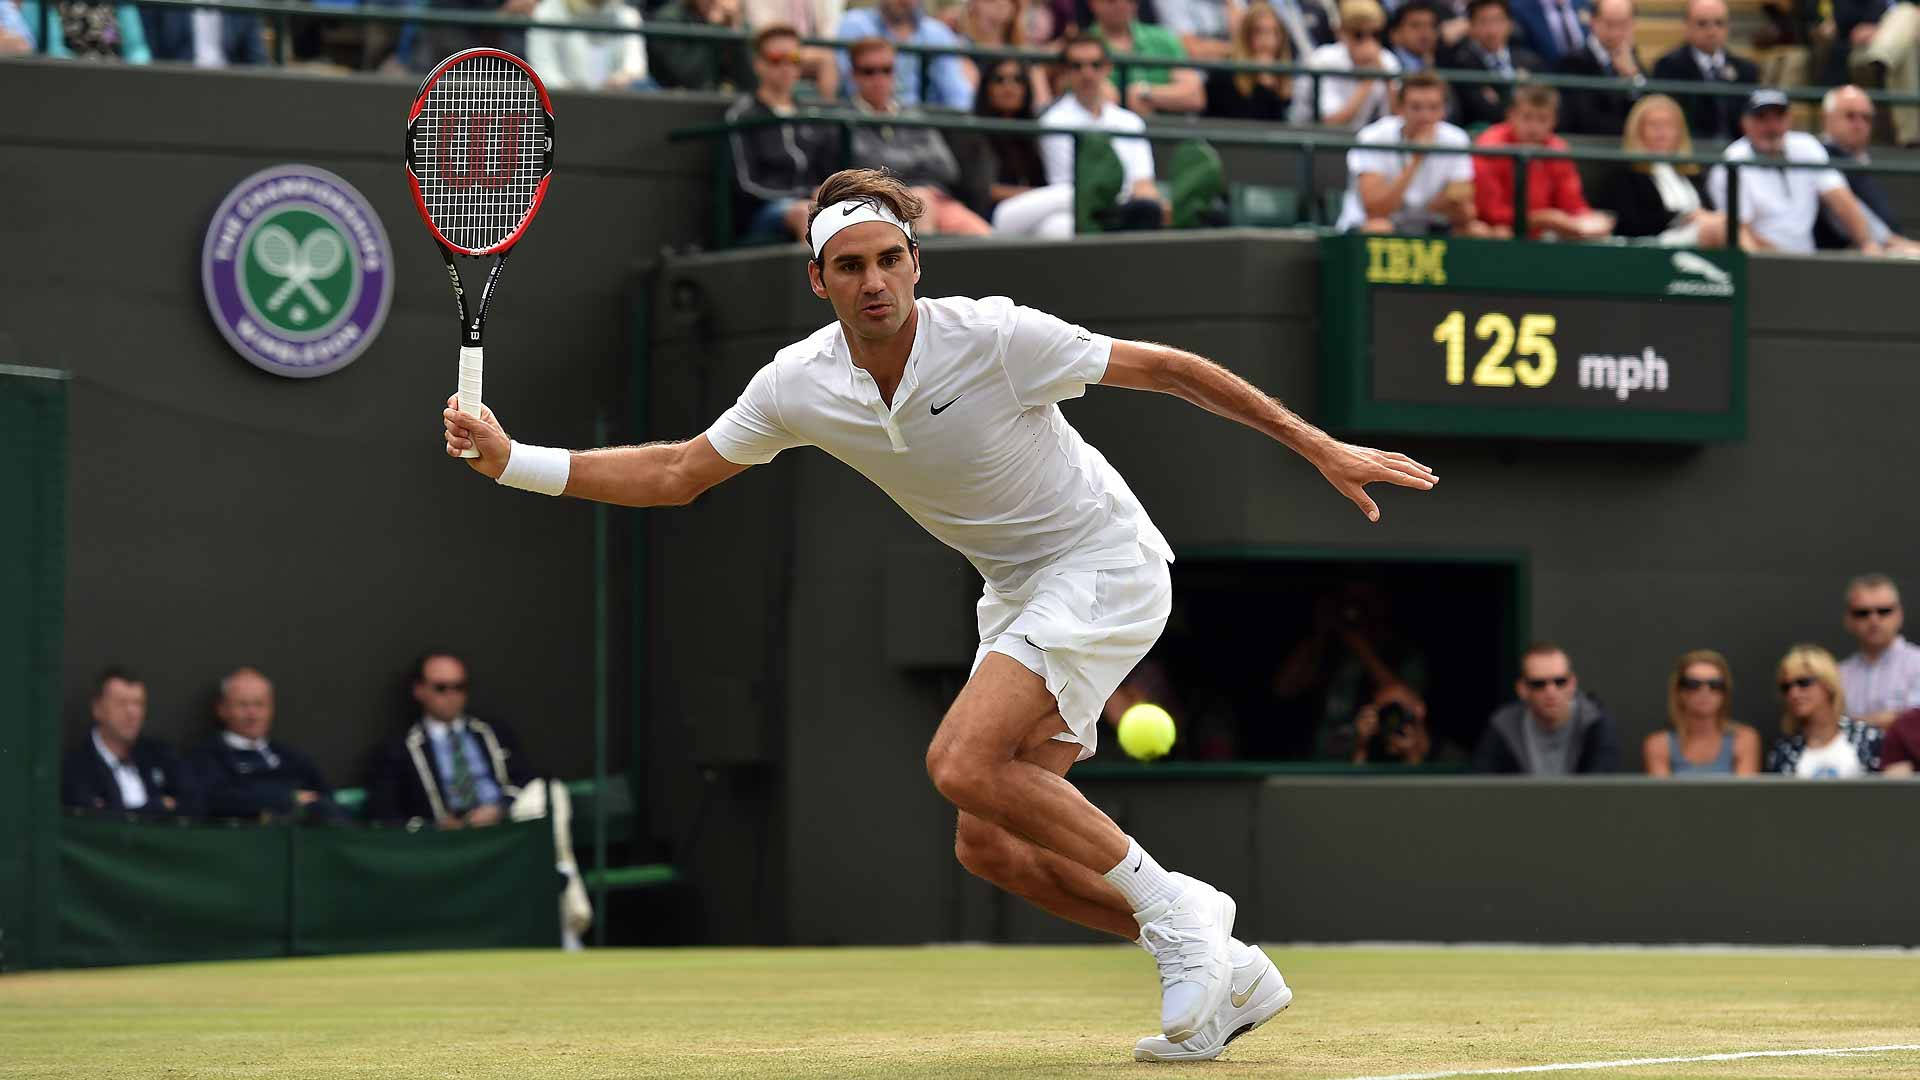 Caption: Roger Federer In Action At The Iconic Wimbledon Court